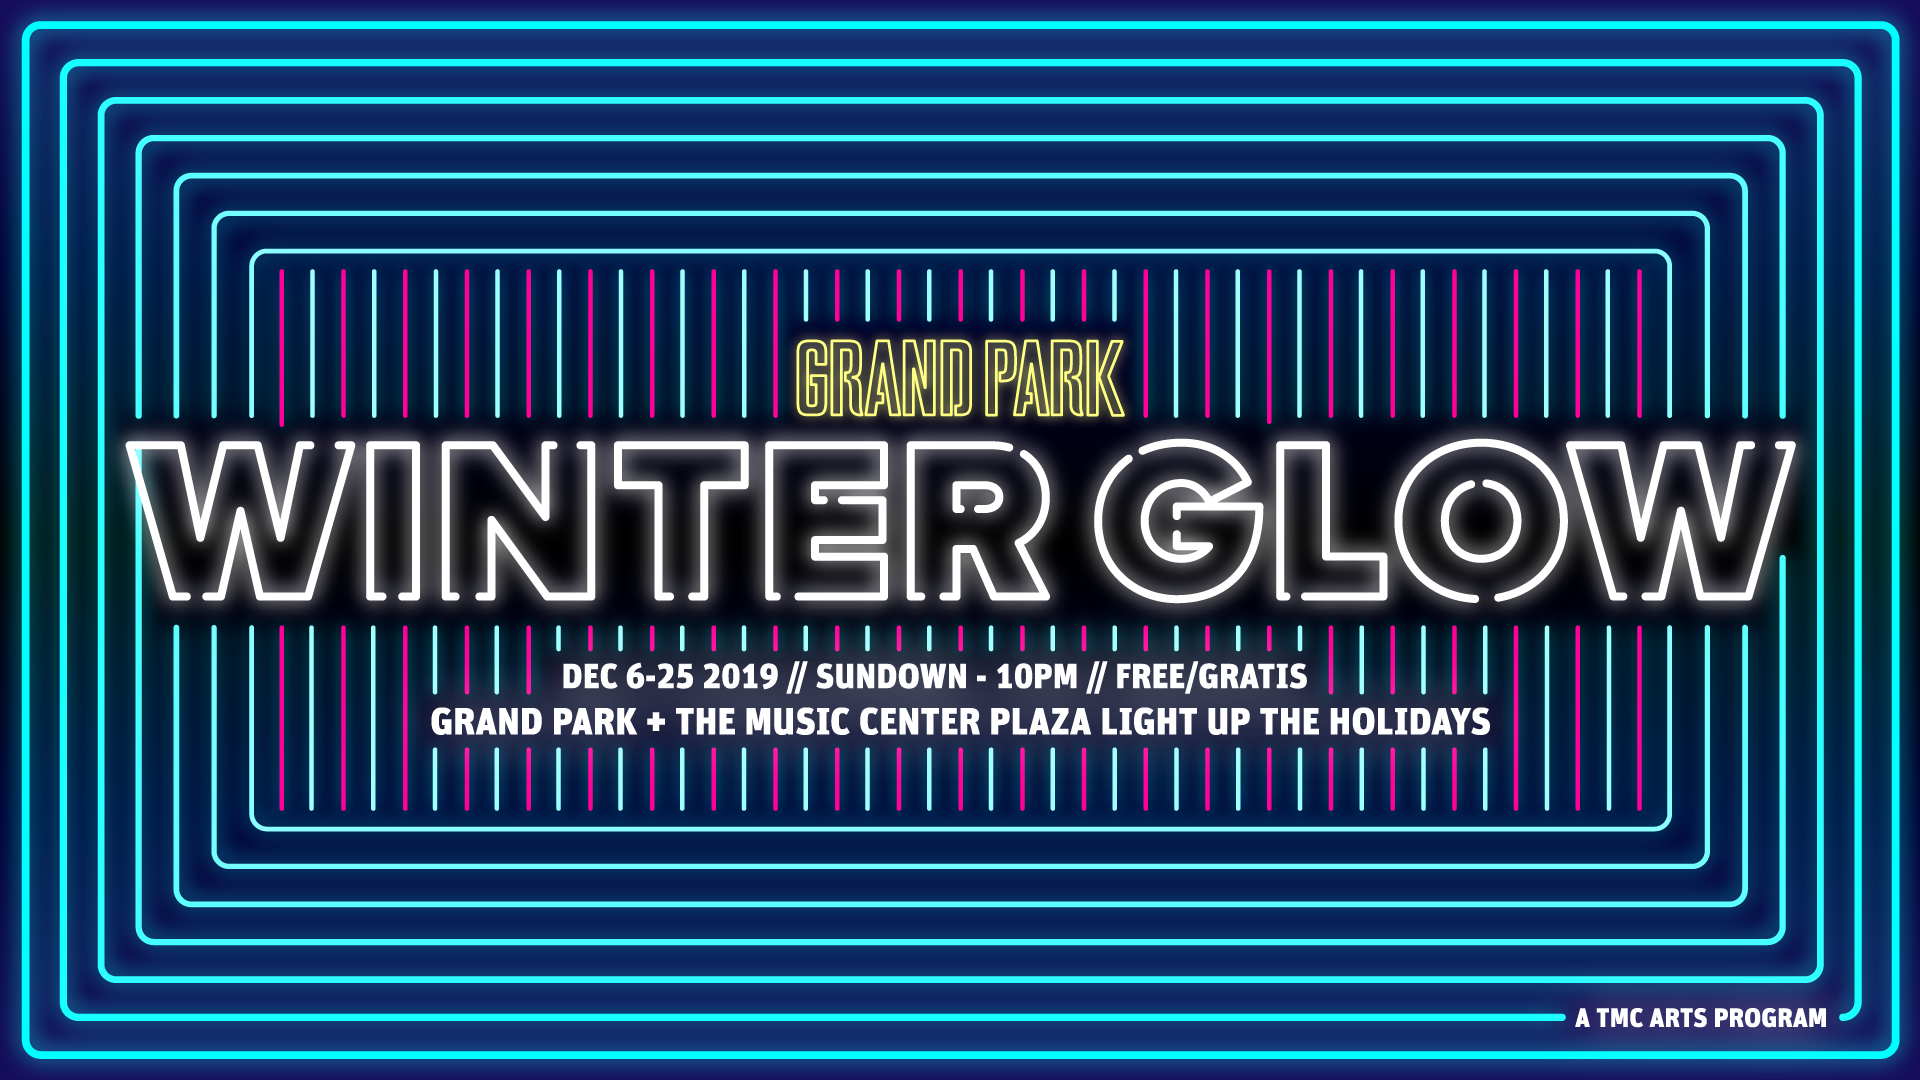 Grand Park's Winter Glow 2019 @ Grand Park - Performance Lawn and The Music Center Plaza